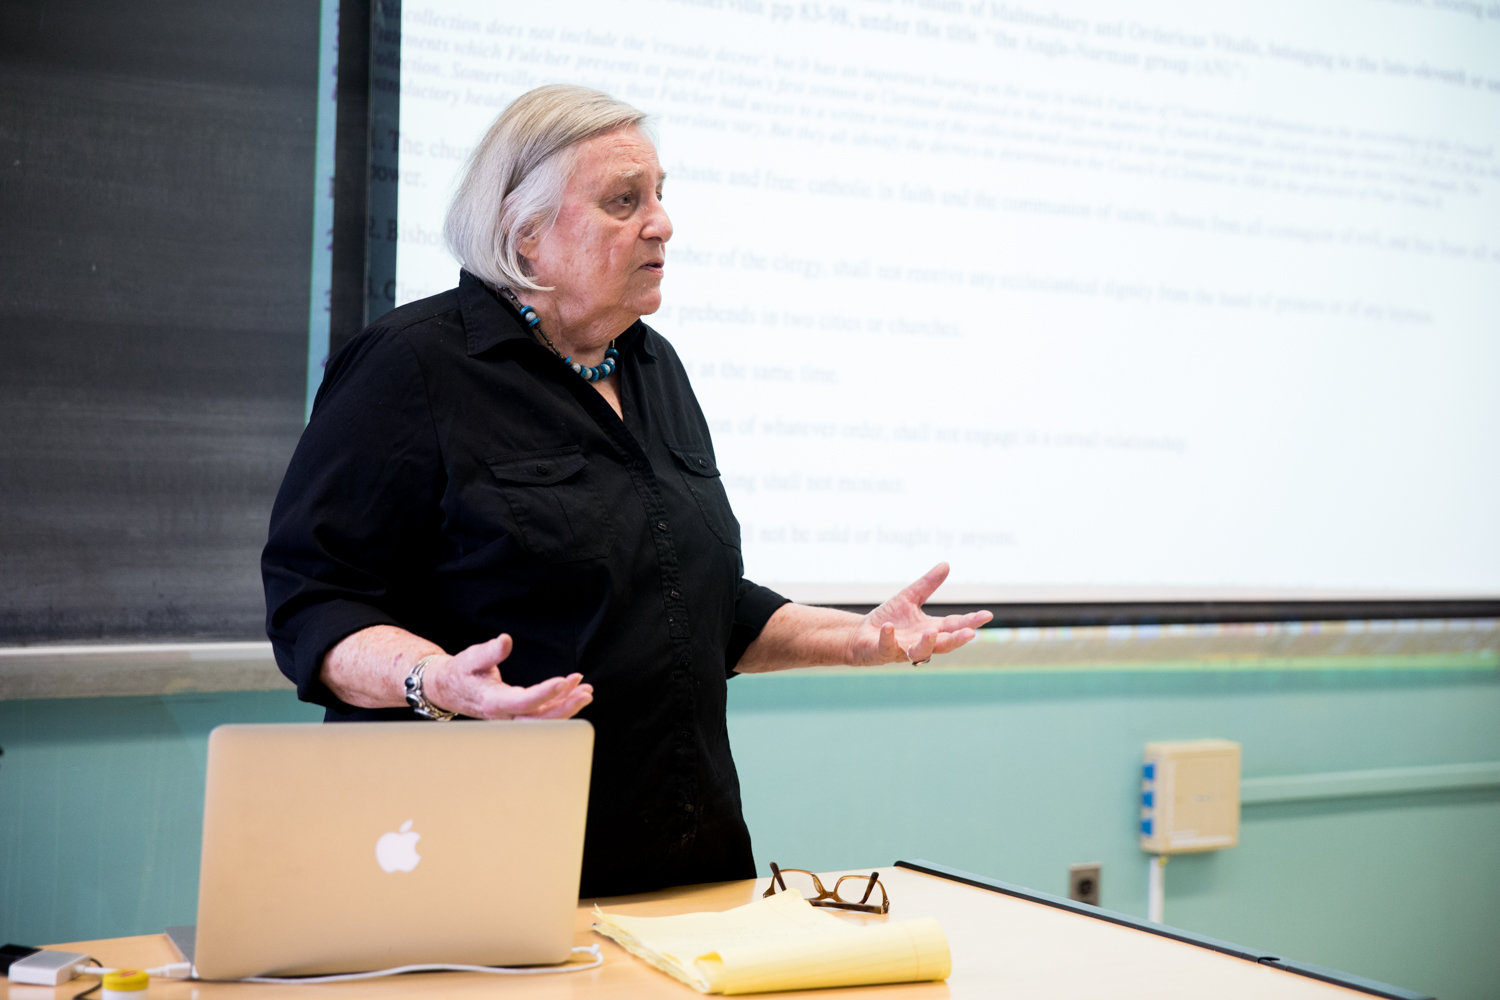 Diane Auslander talks about the Crusades during her medieval civilization course at Lehman College. An adjunct professor, Auslander is voting yes on the proposed CUNY collective bargaining contract because it will give her a much-needed pay raise.